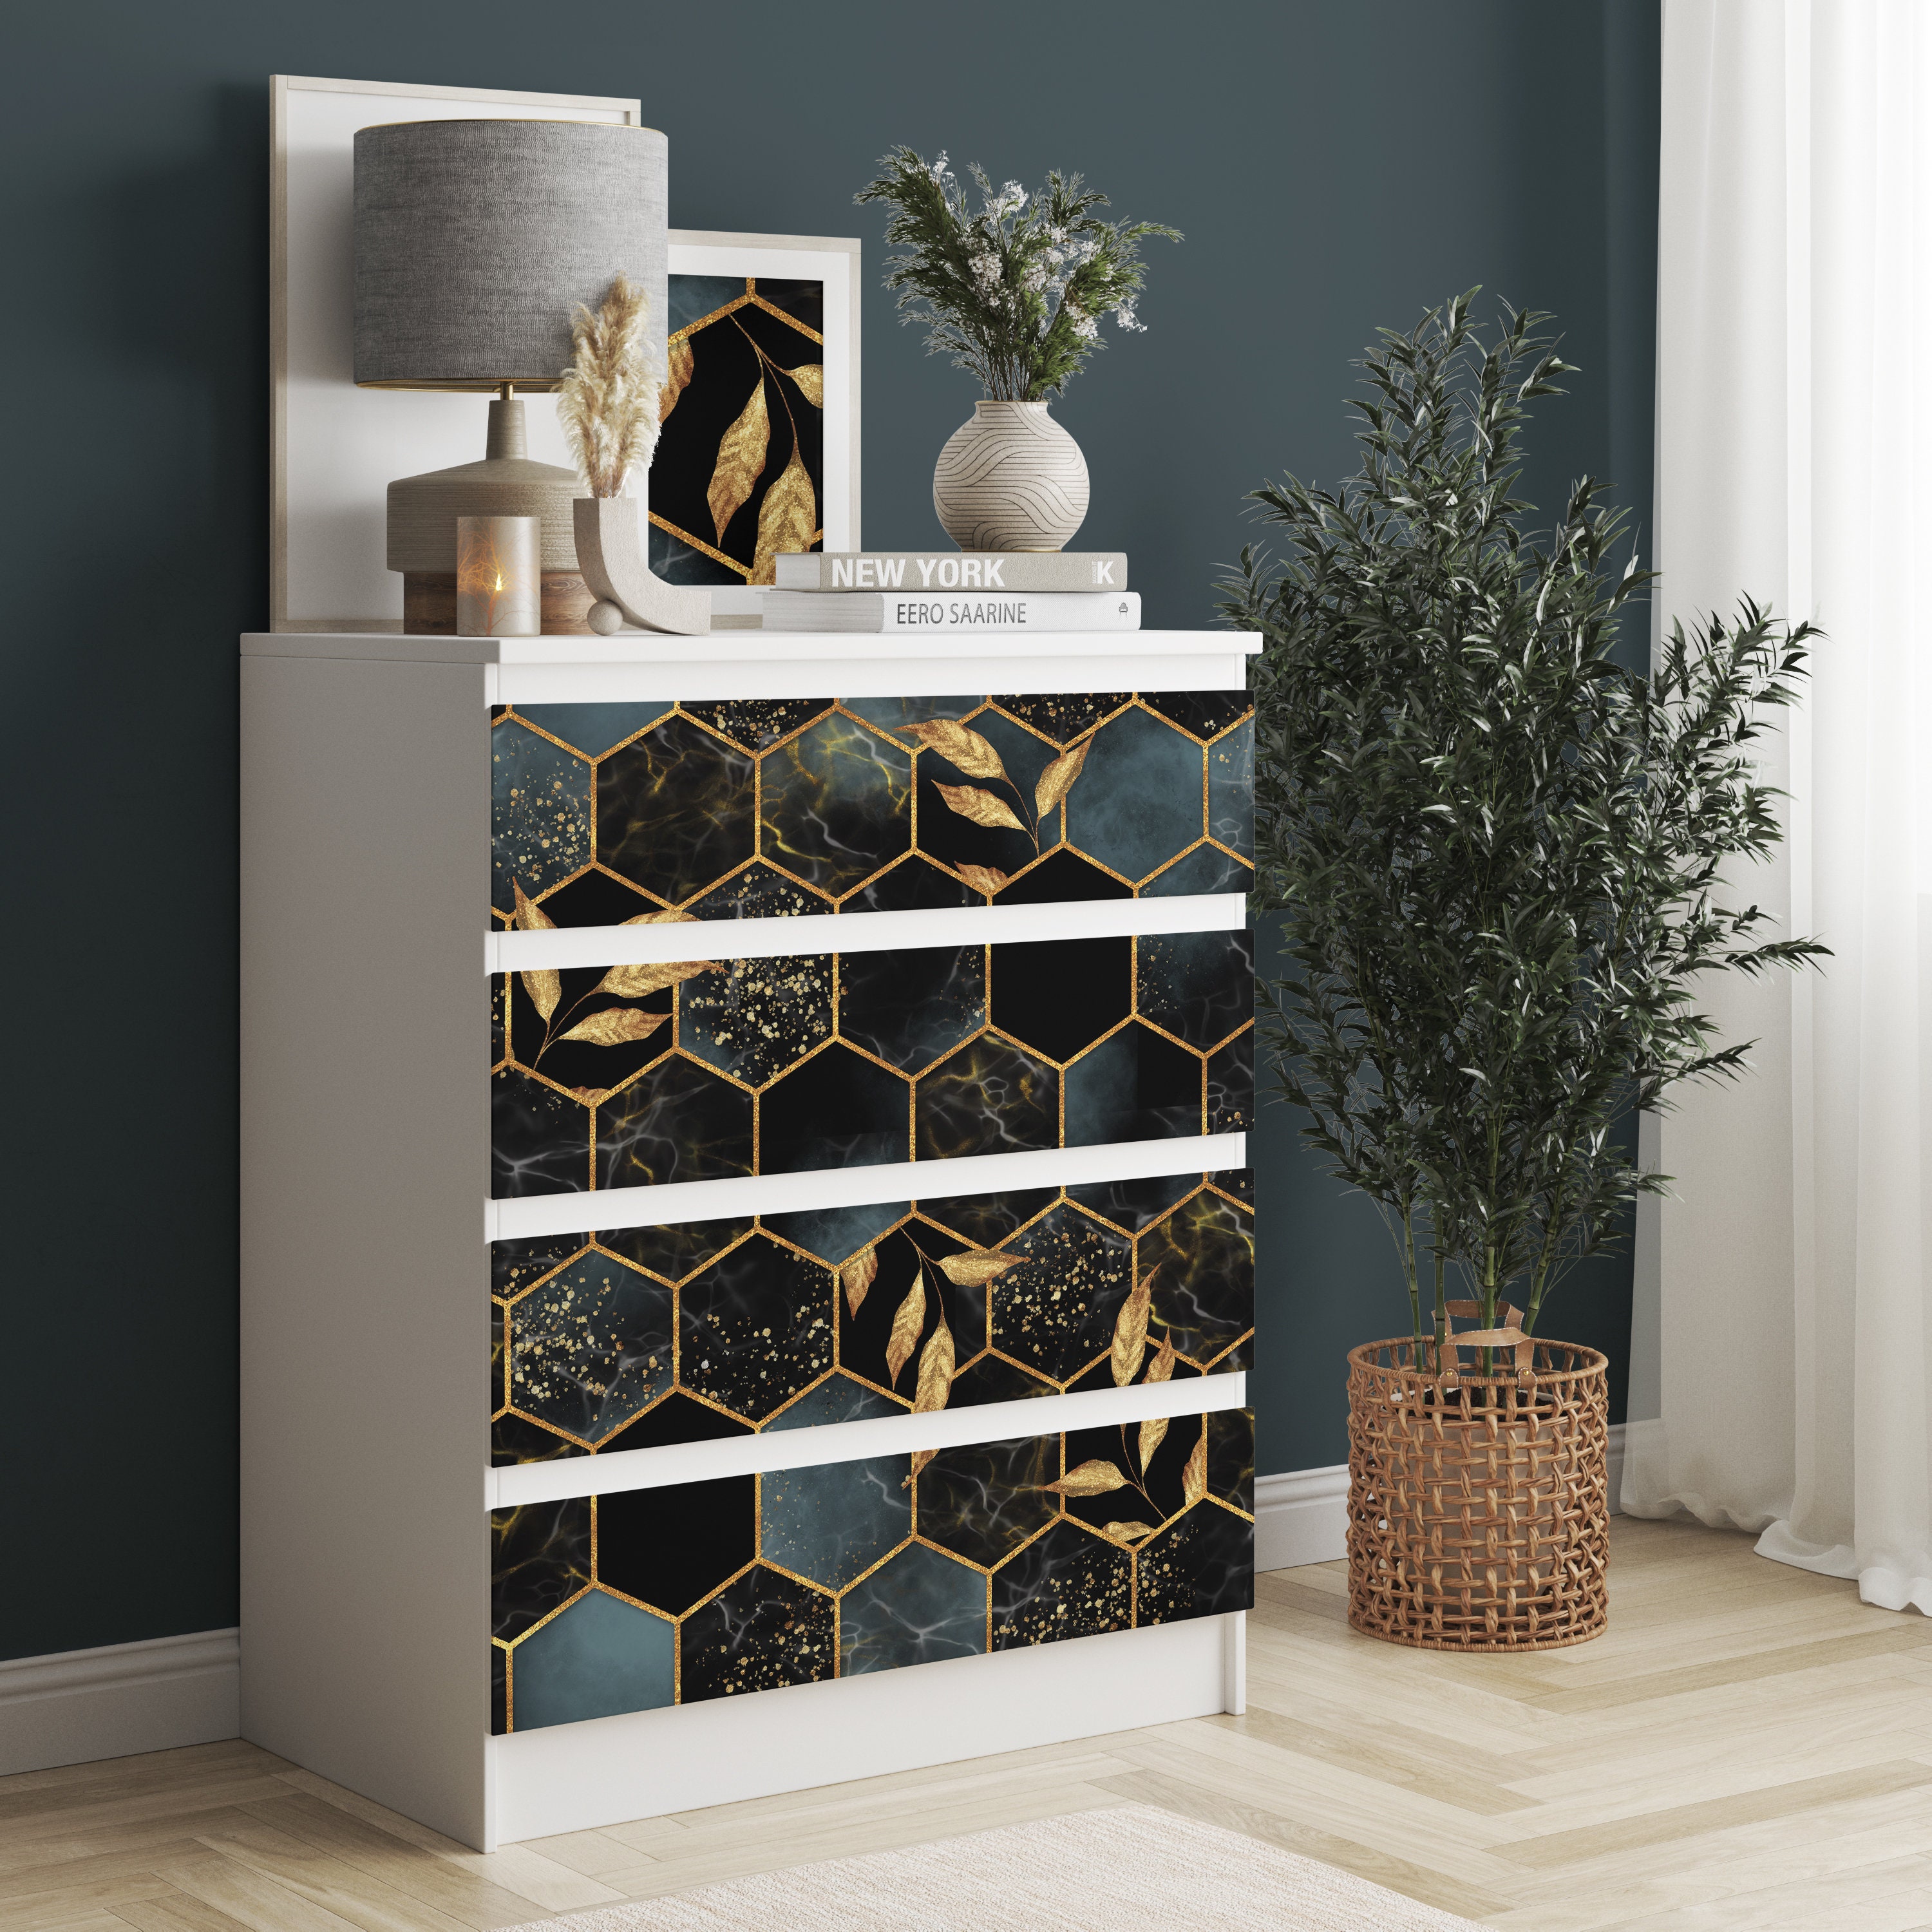 MALM IKEA Dresser Styling Modern, Louis Vuitton, Hermes, Chanel, Jewelry  Display, Continuous Line Art